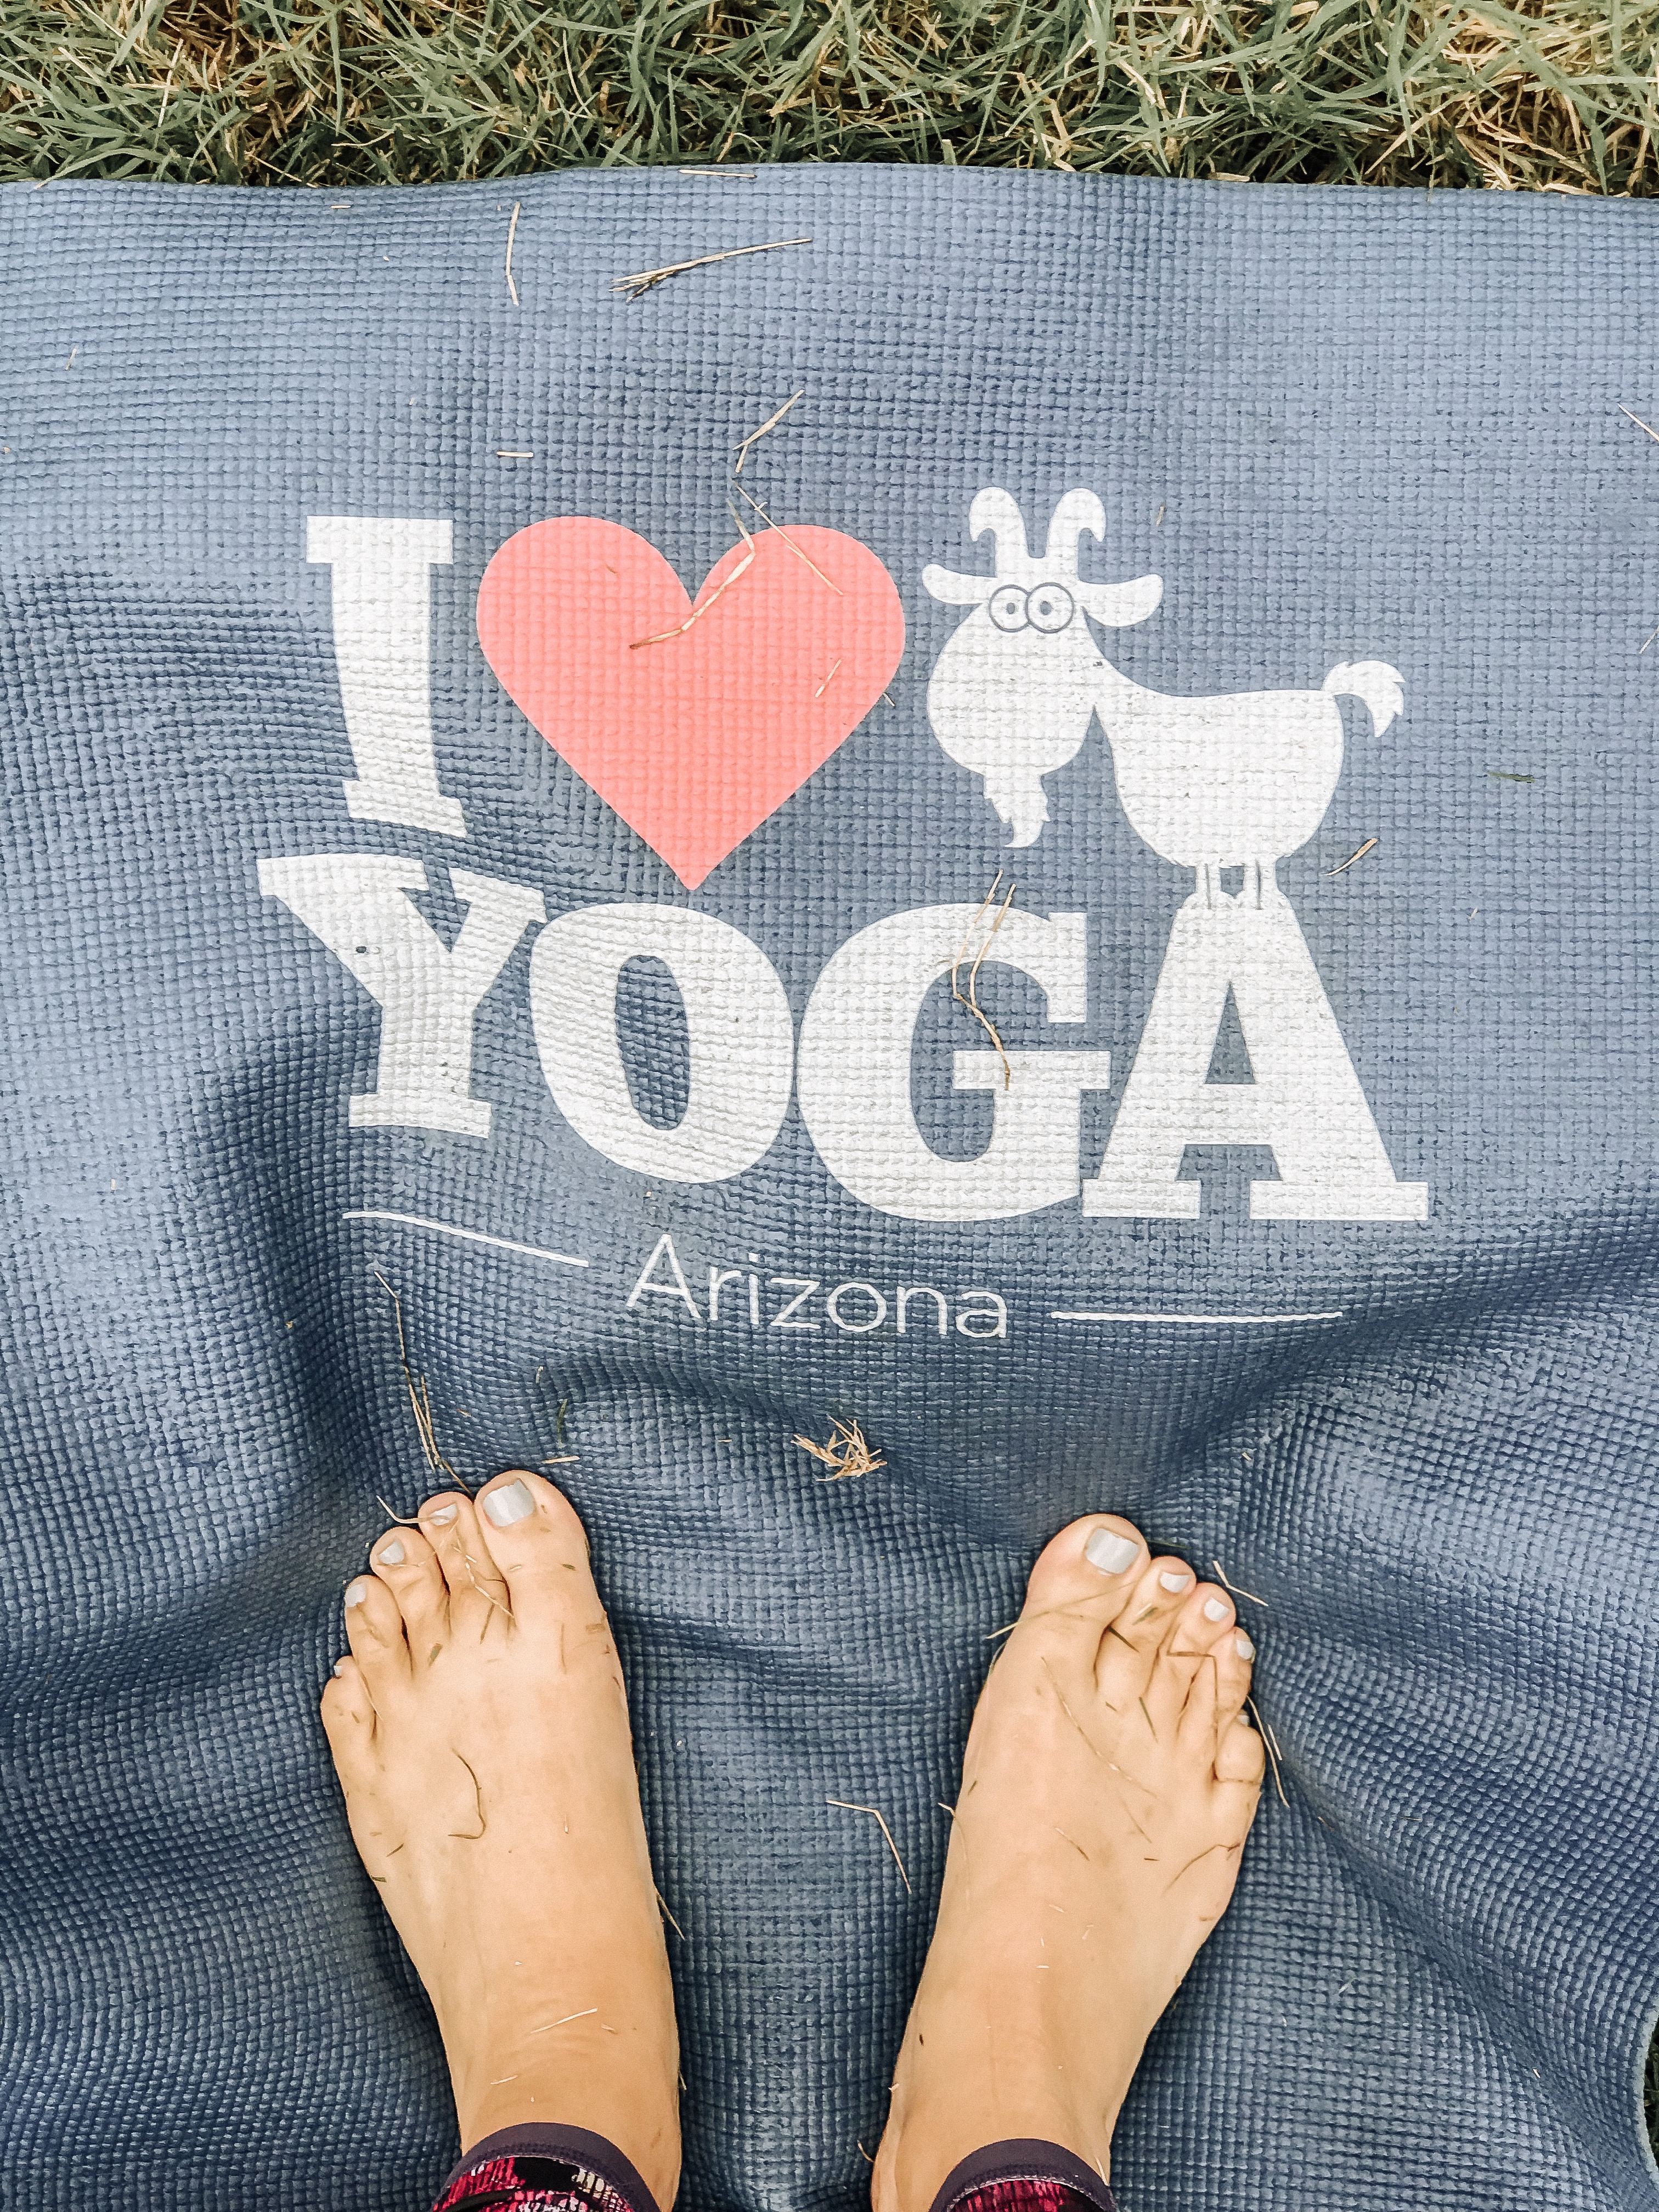 AZ goat yoga | The Best Phoenix Travel Guide featured by top Denver travel guide, All Things Lovely